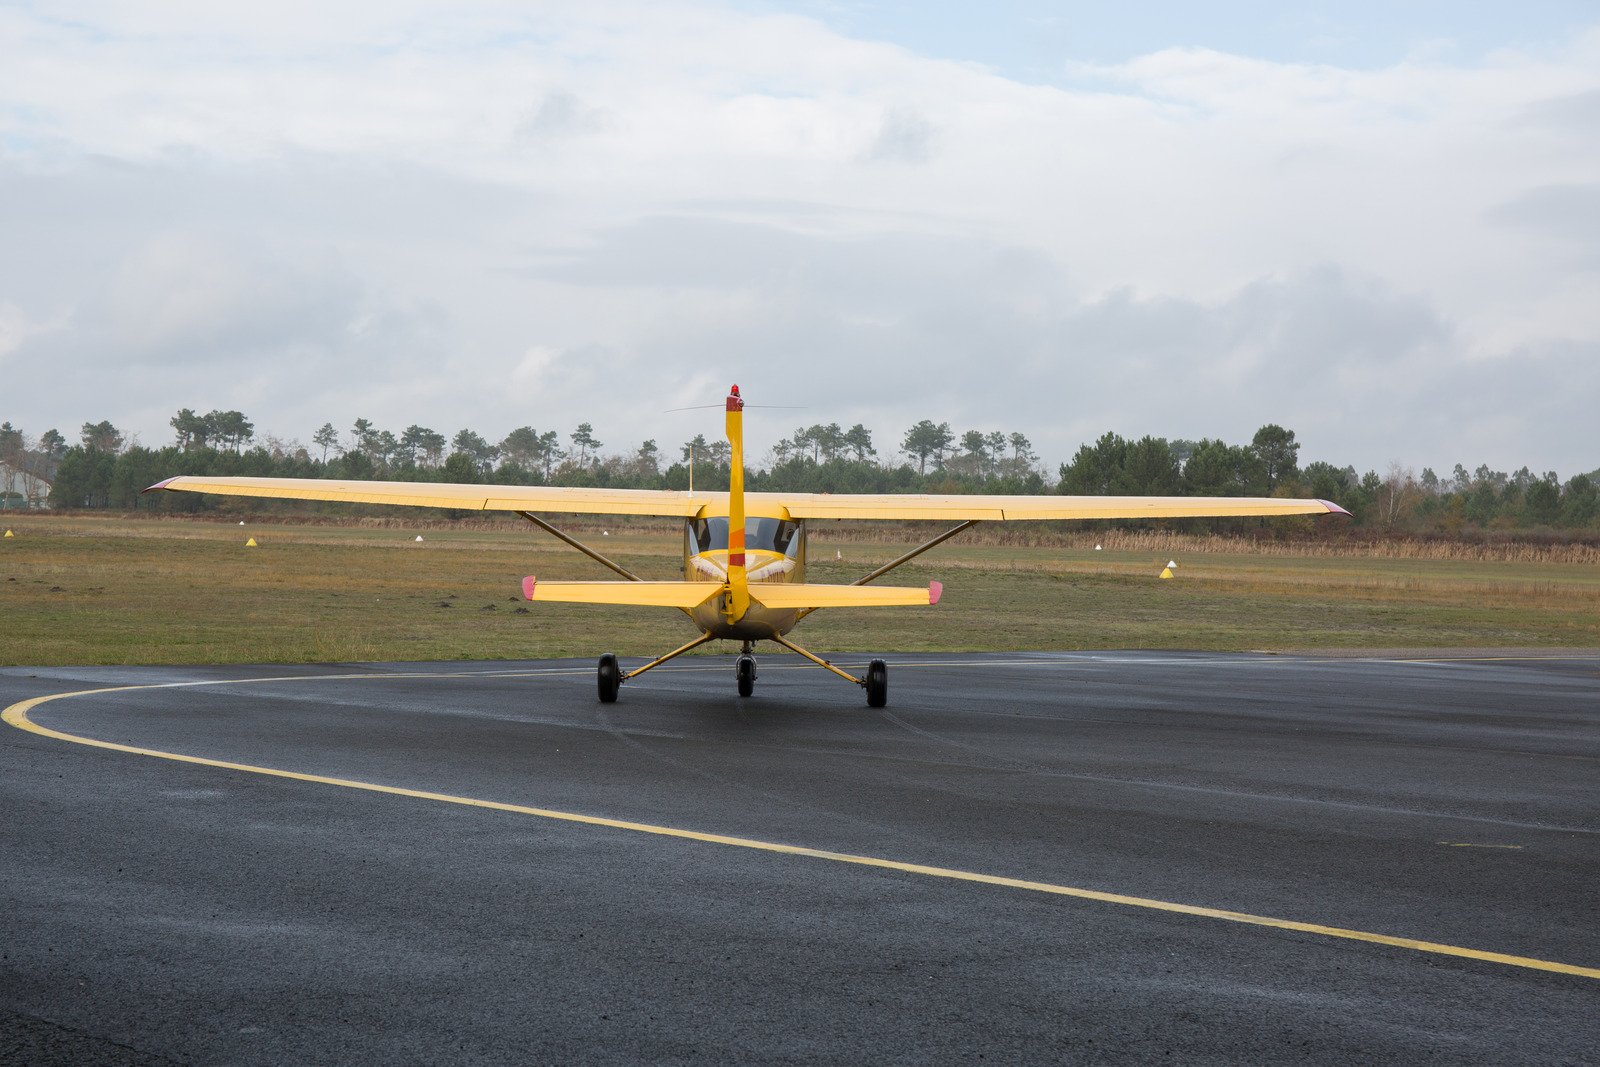 Cessna 310 Airplane on Runway - Fotos do Canva